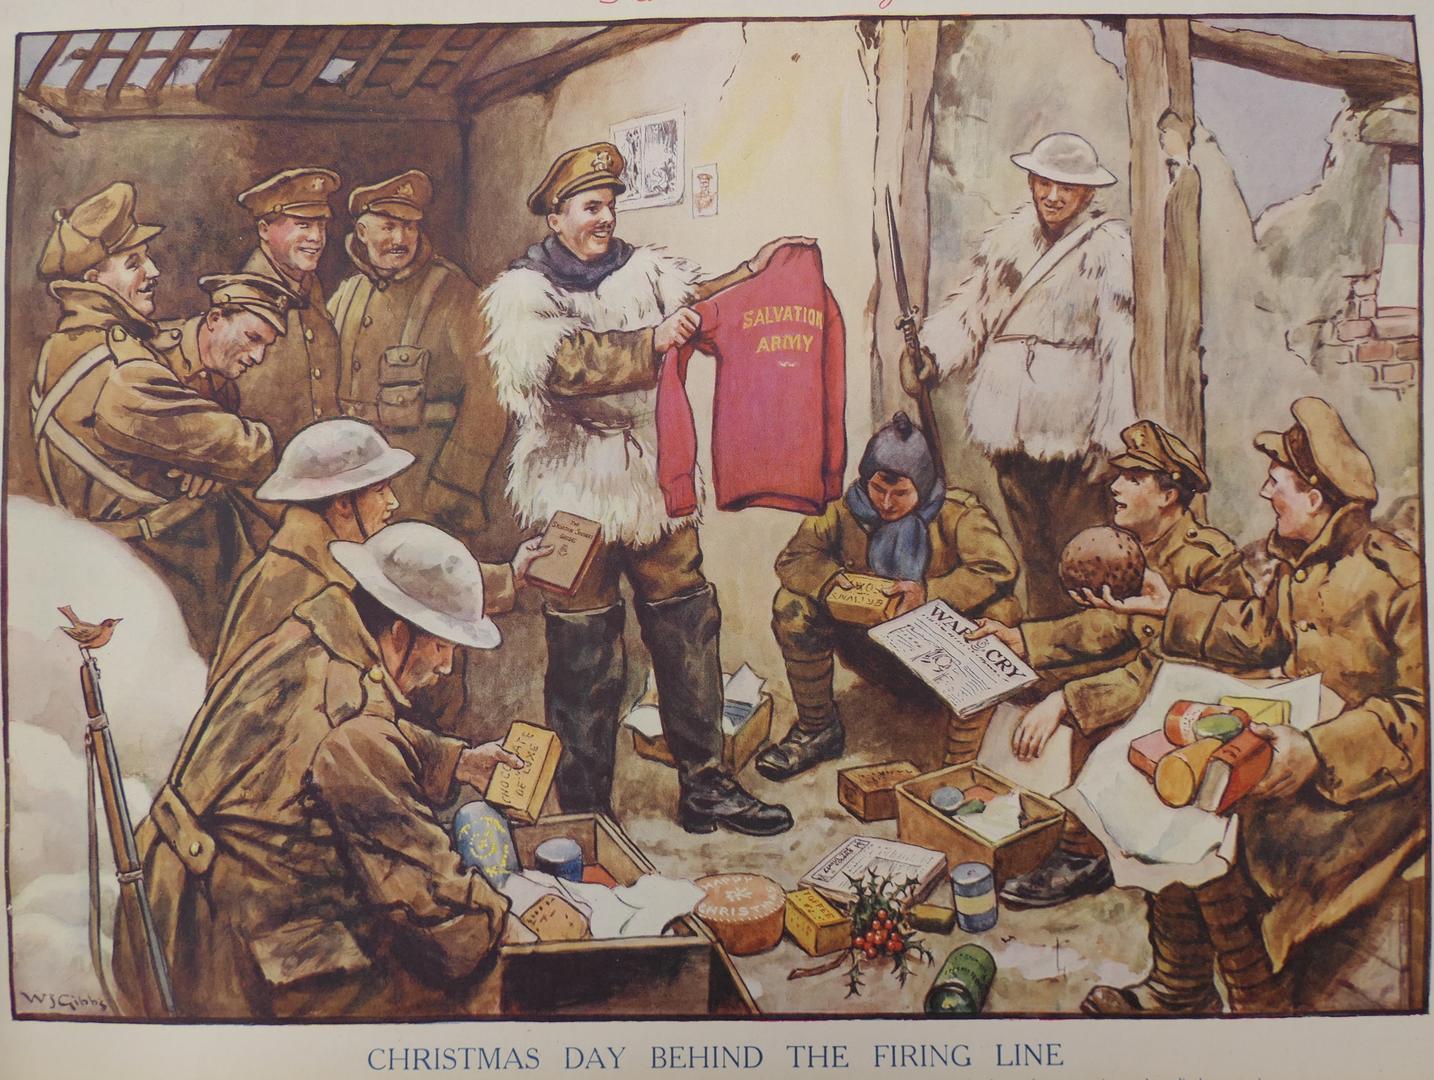 'Christmas Day Behind the Firing Line': artwork by WJ Gibbs